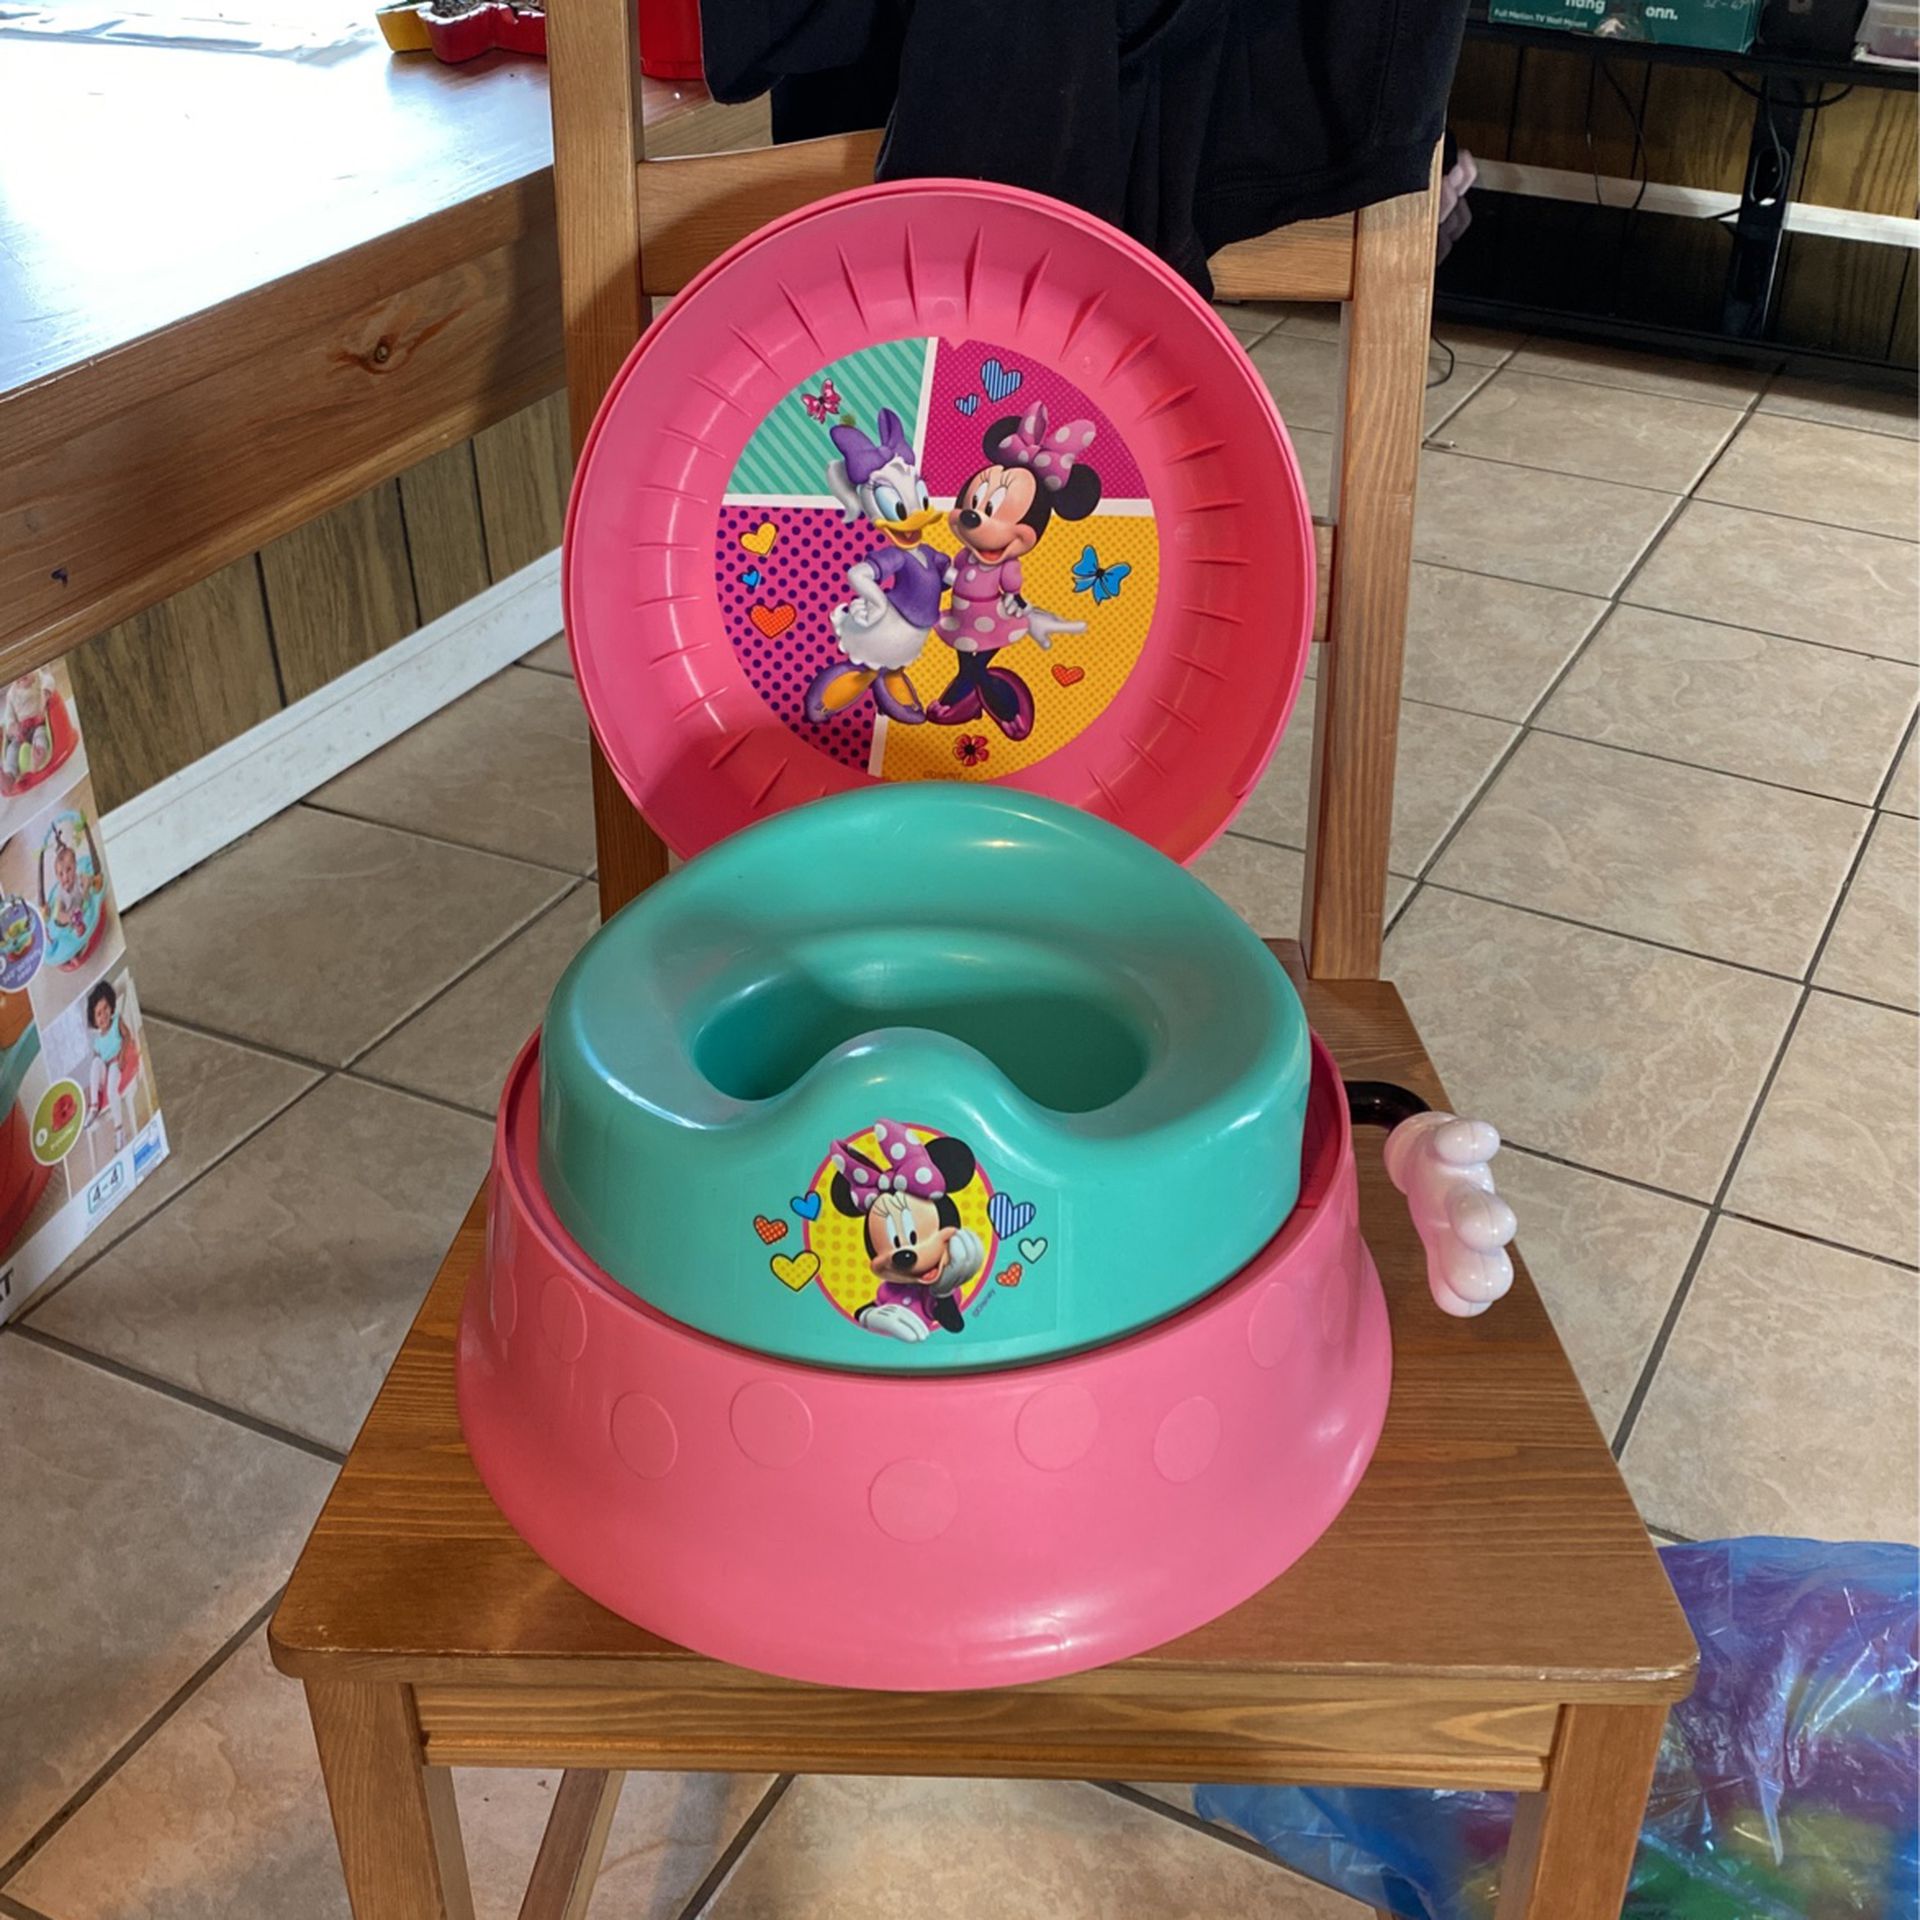 Minnie Mouse 3-in-1 Potty System